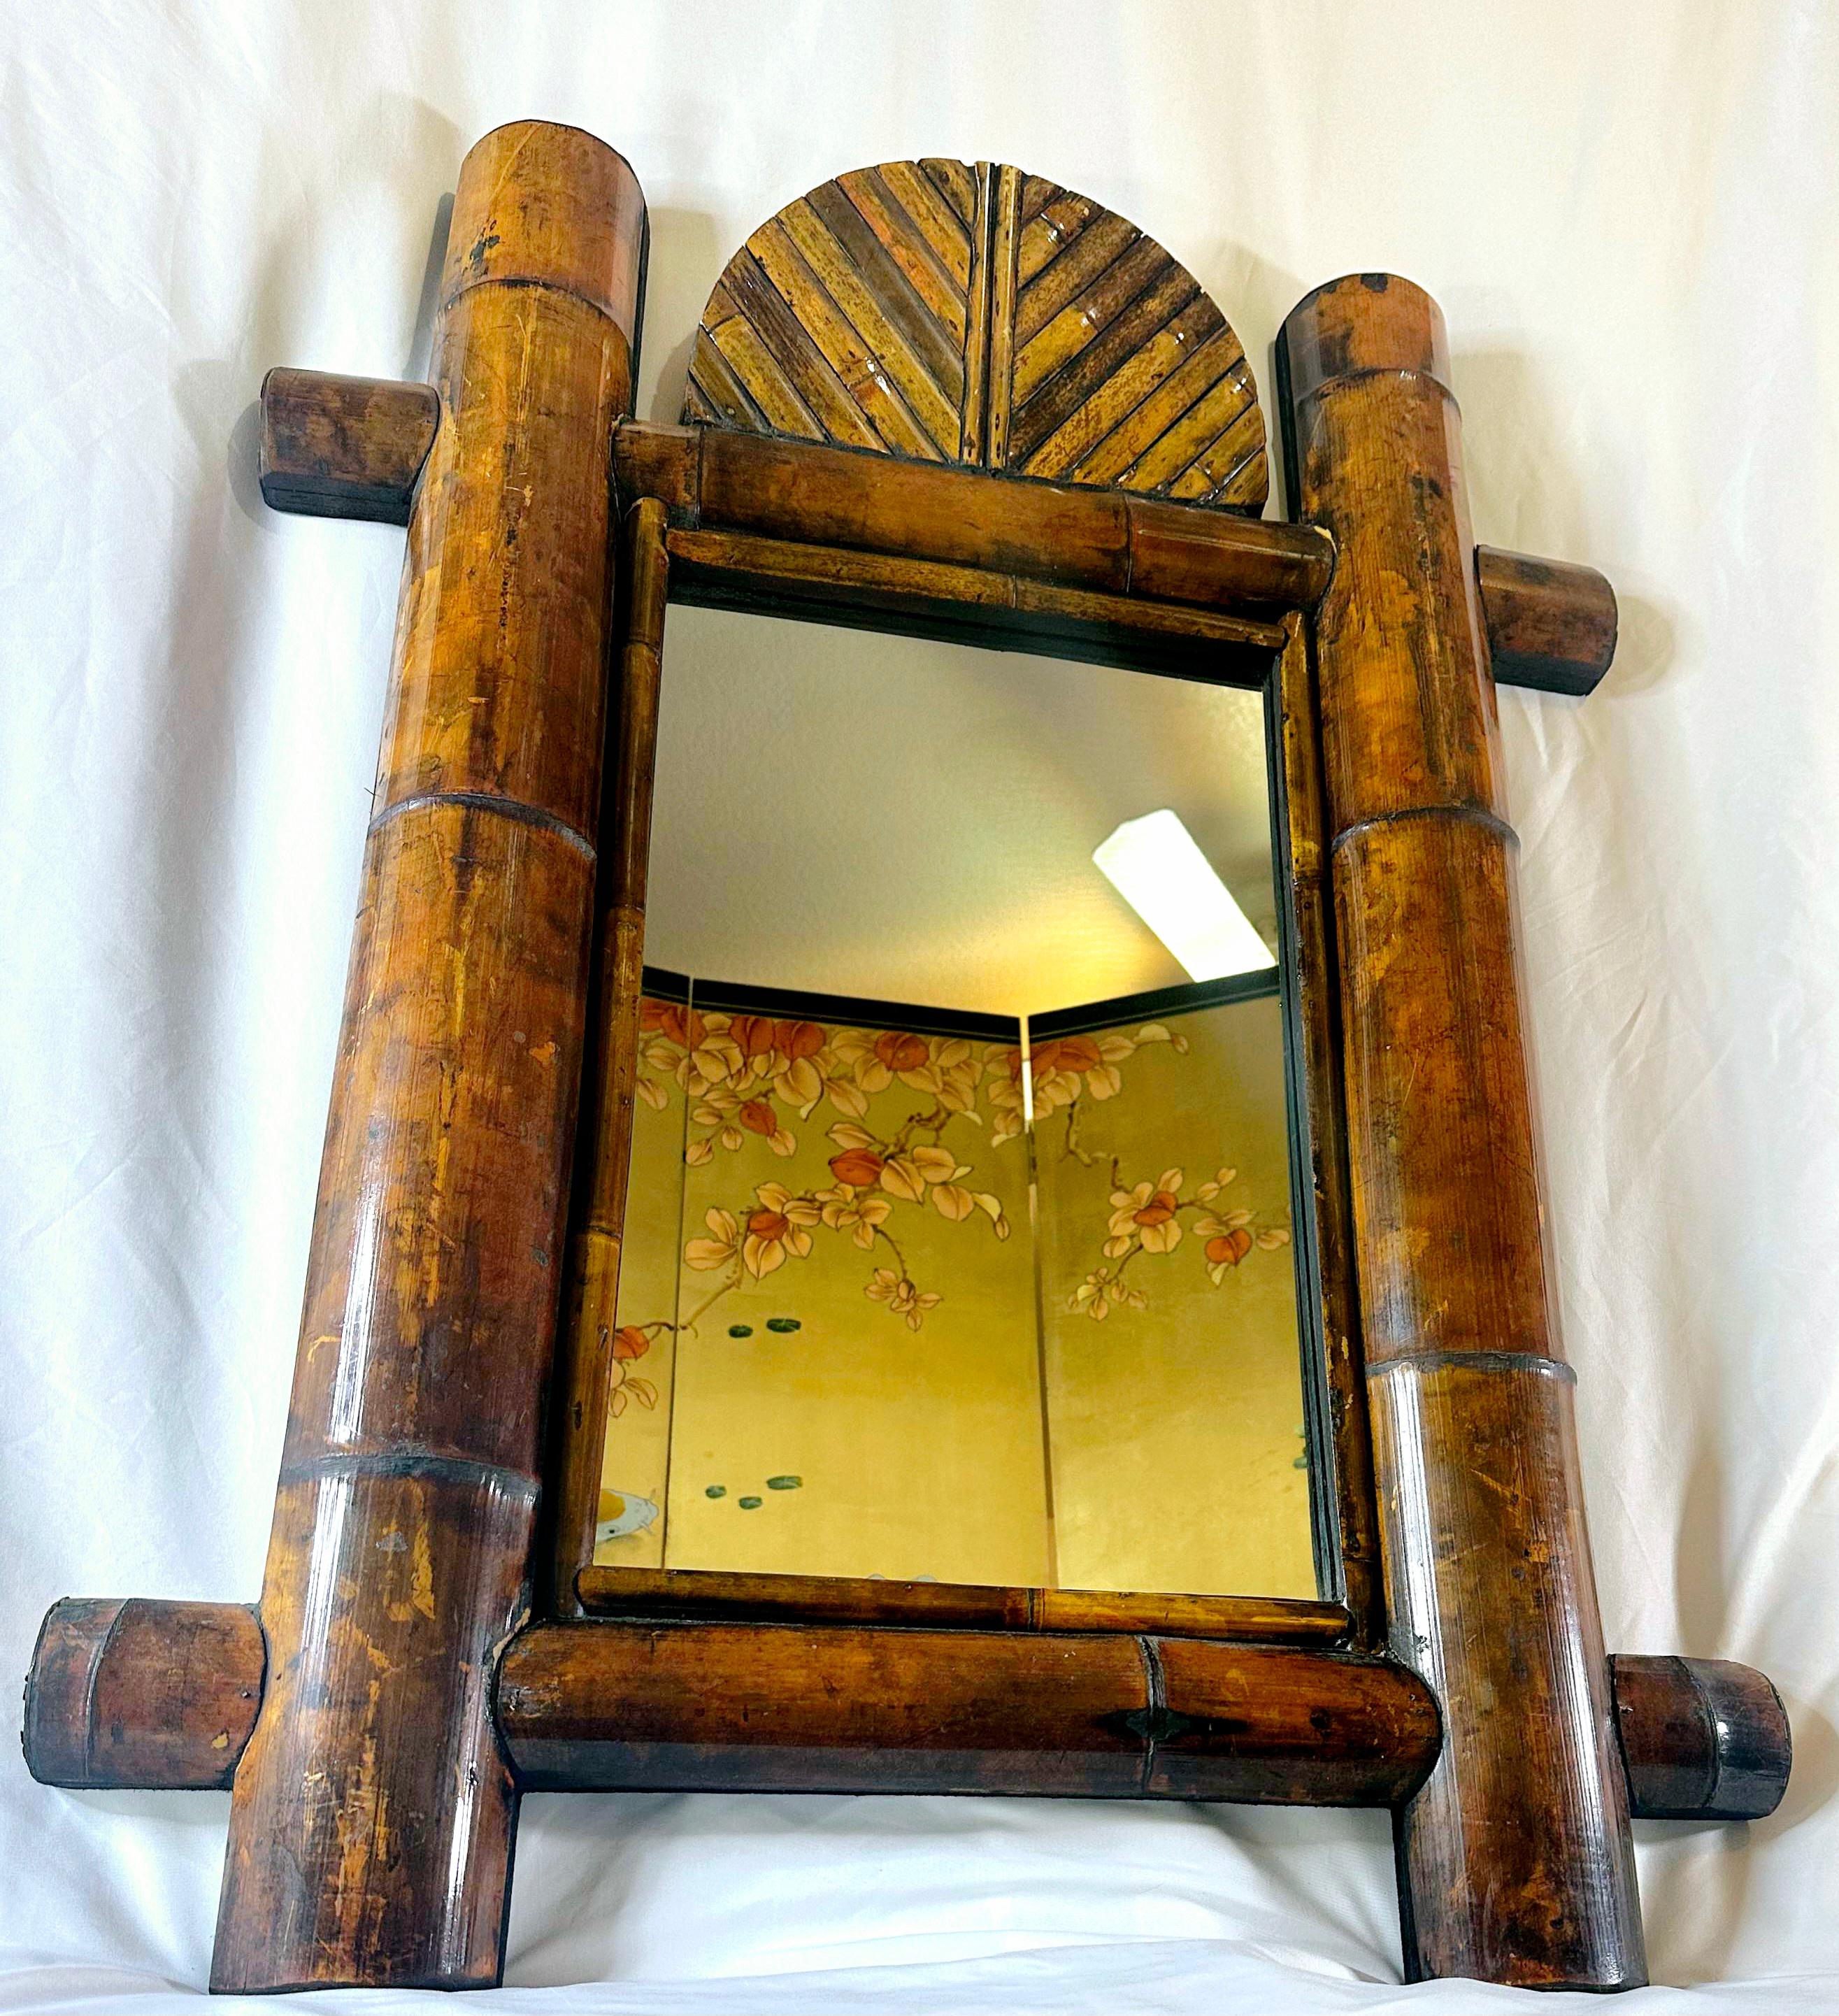 Very Tommy Bahama or Earnest Hemingway in its tropical style. 
Gorgeous color in the authentic bamboo.  
Incredible, large vintage split bamboo mirror. Four giant split bamboo pieces surround mirror with smaller bamboo pieces,  or cane rattan, as